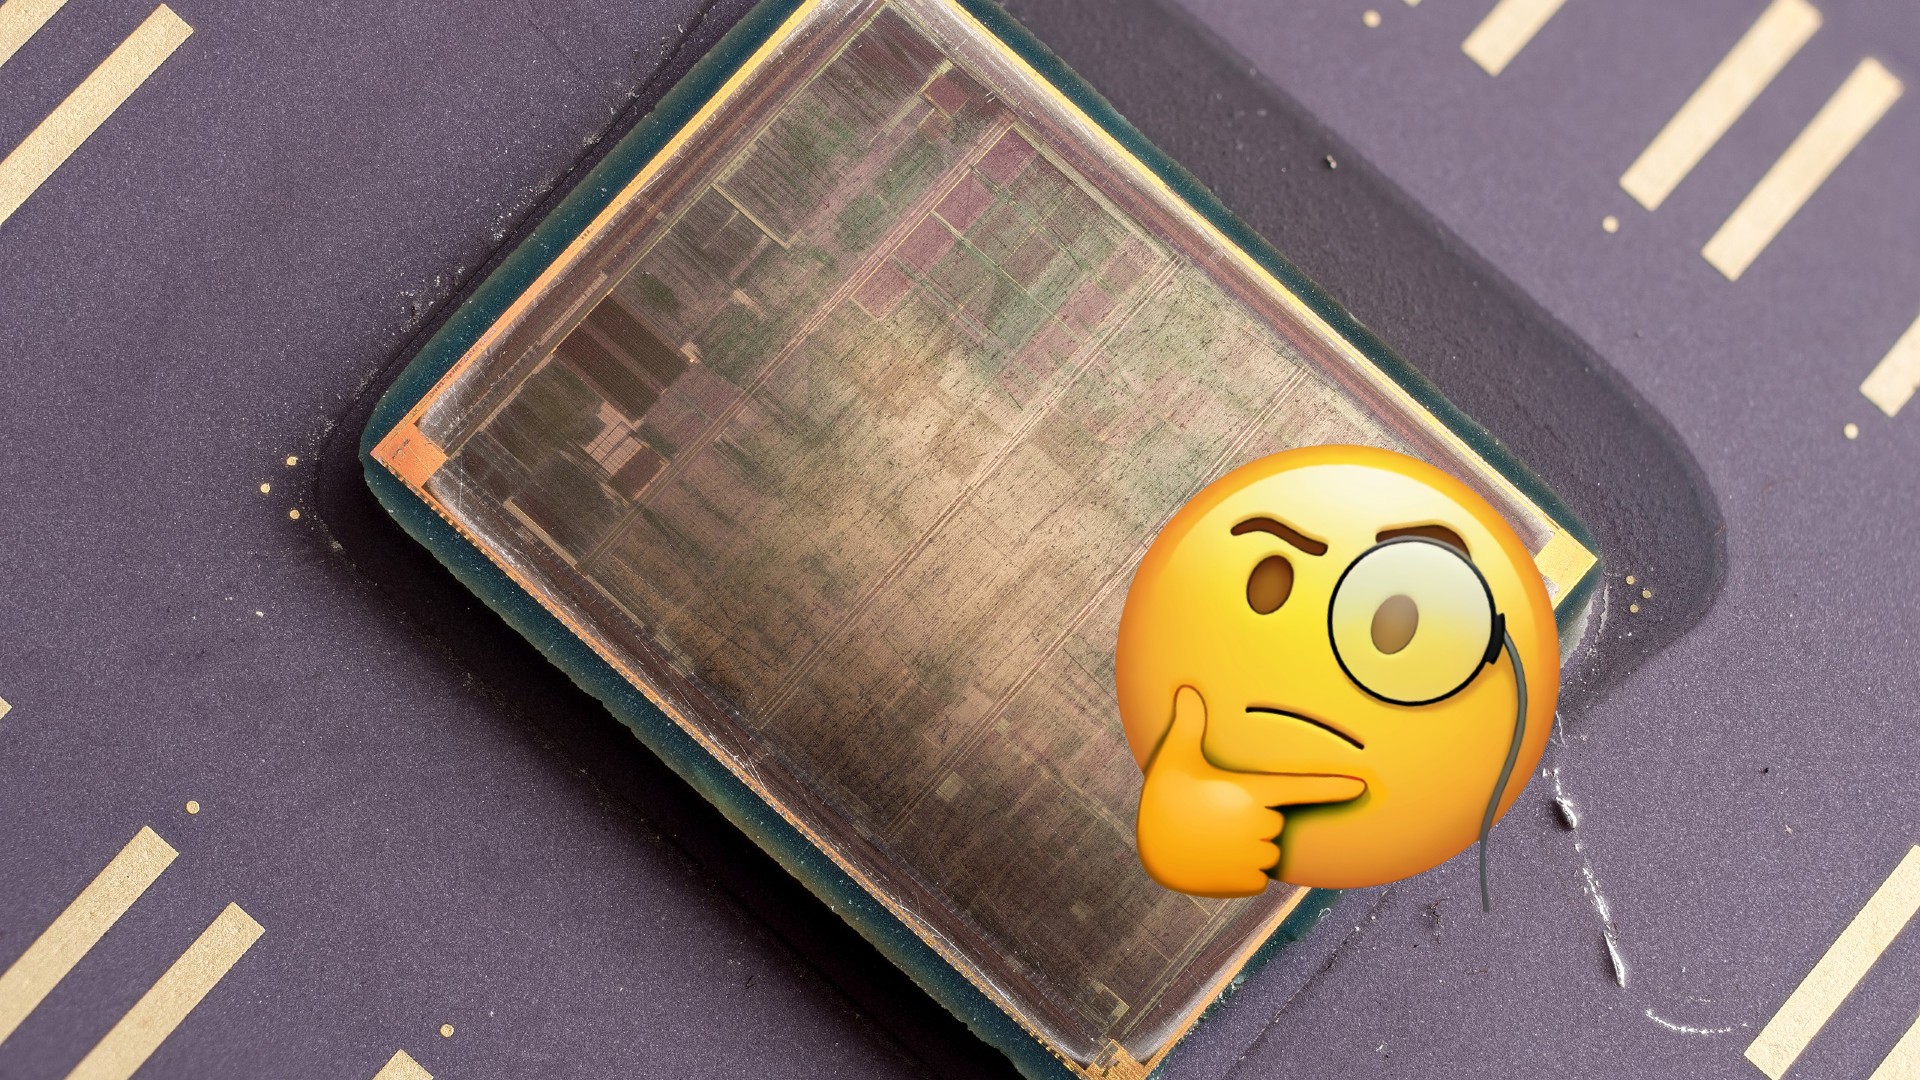 A 25 year old easter egg has just been discovered in an AMD CPU